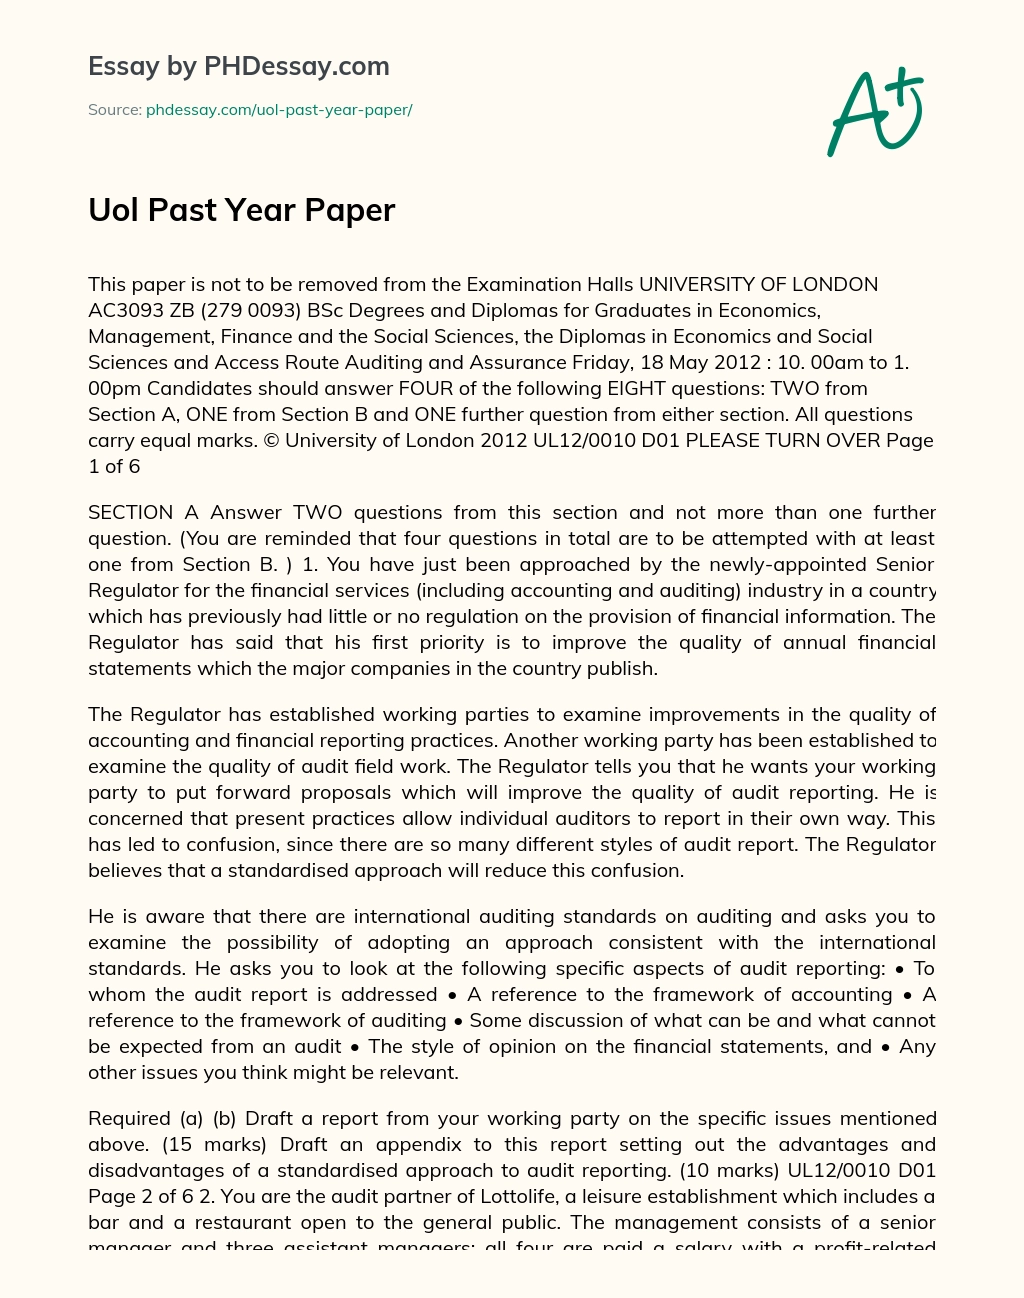 Uol Past Year Paper essay